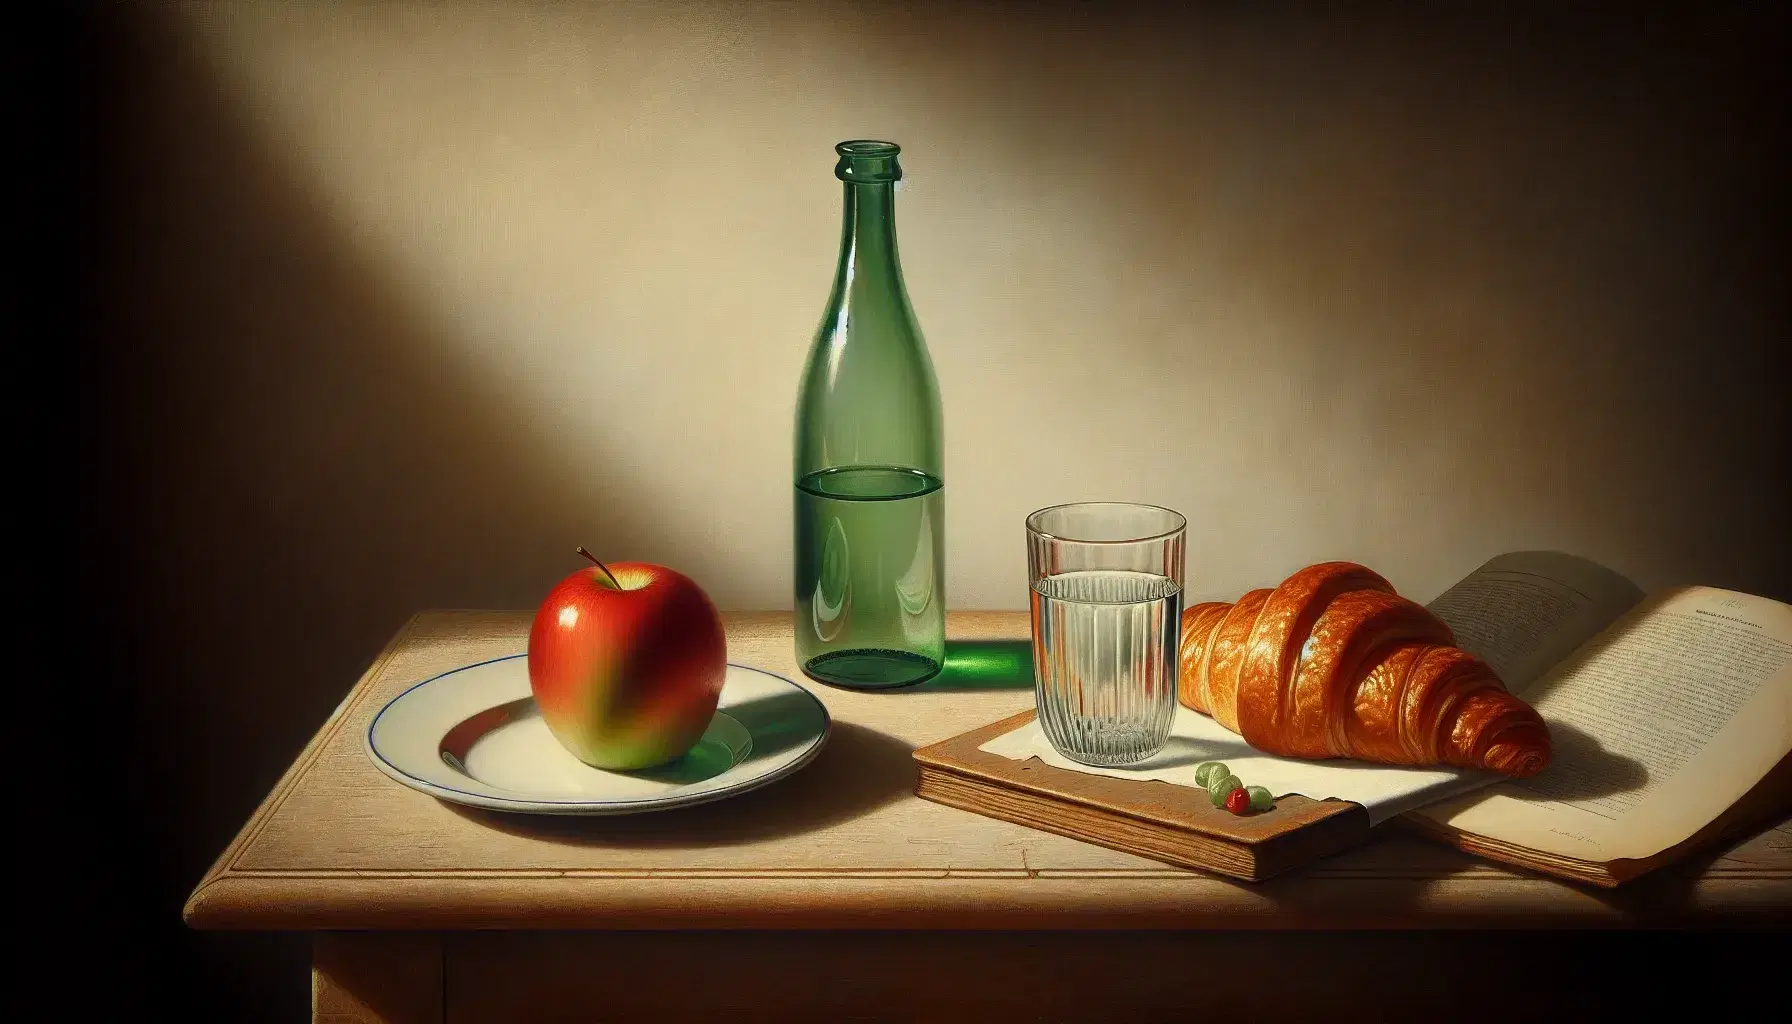 Still life with a shiny red apple, golden-brown croissant on a white plate with blue trim, a glass of water, and an open blue hardcover book on a wooden table.